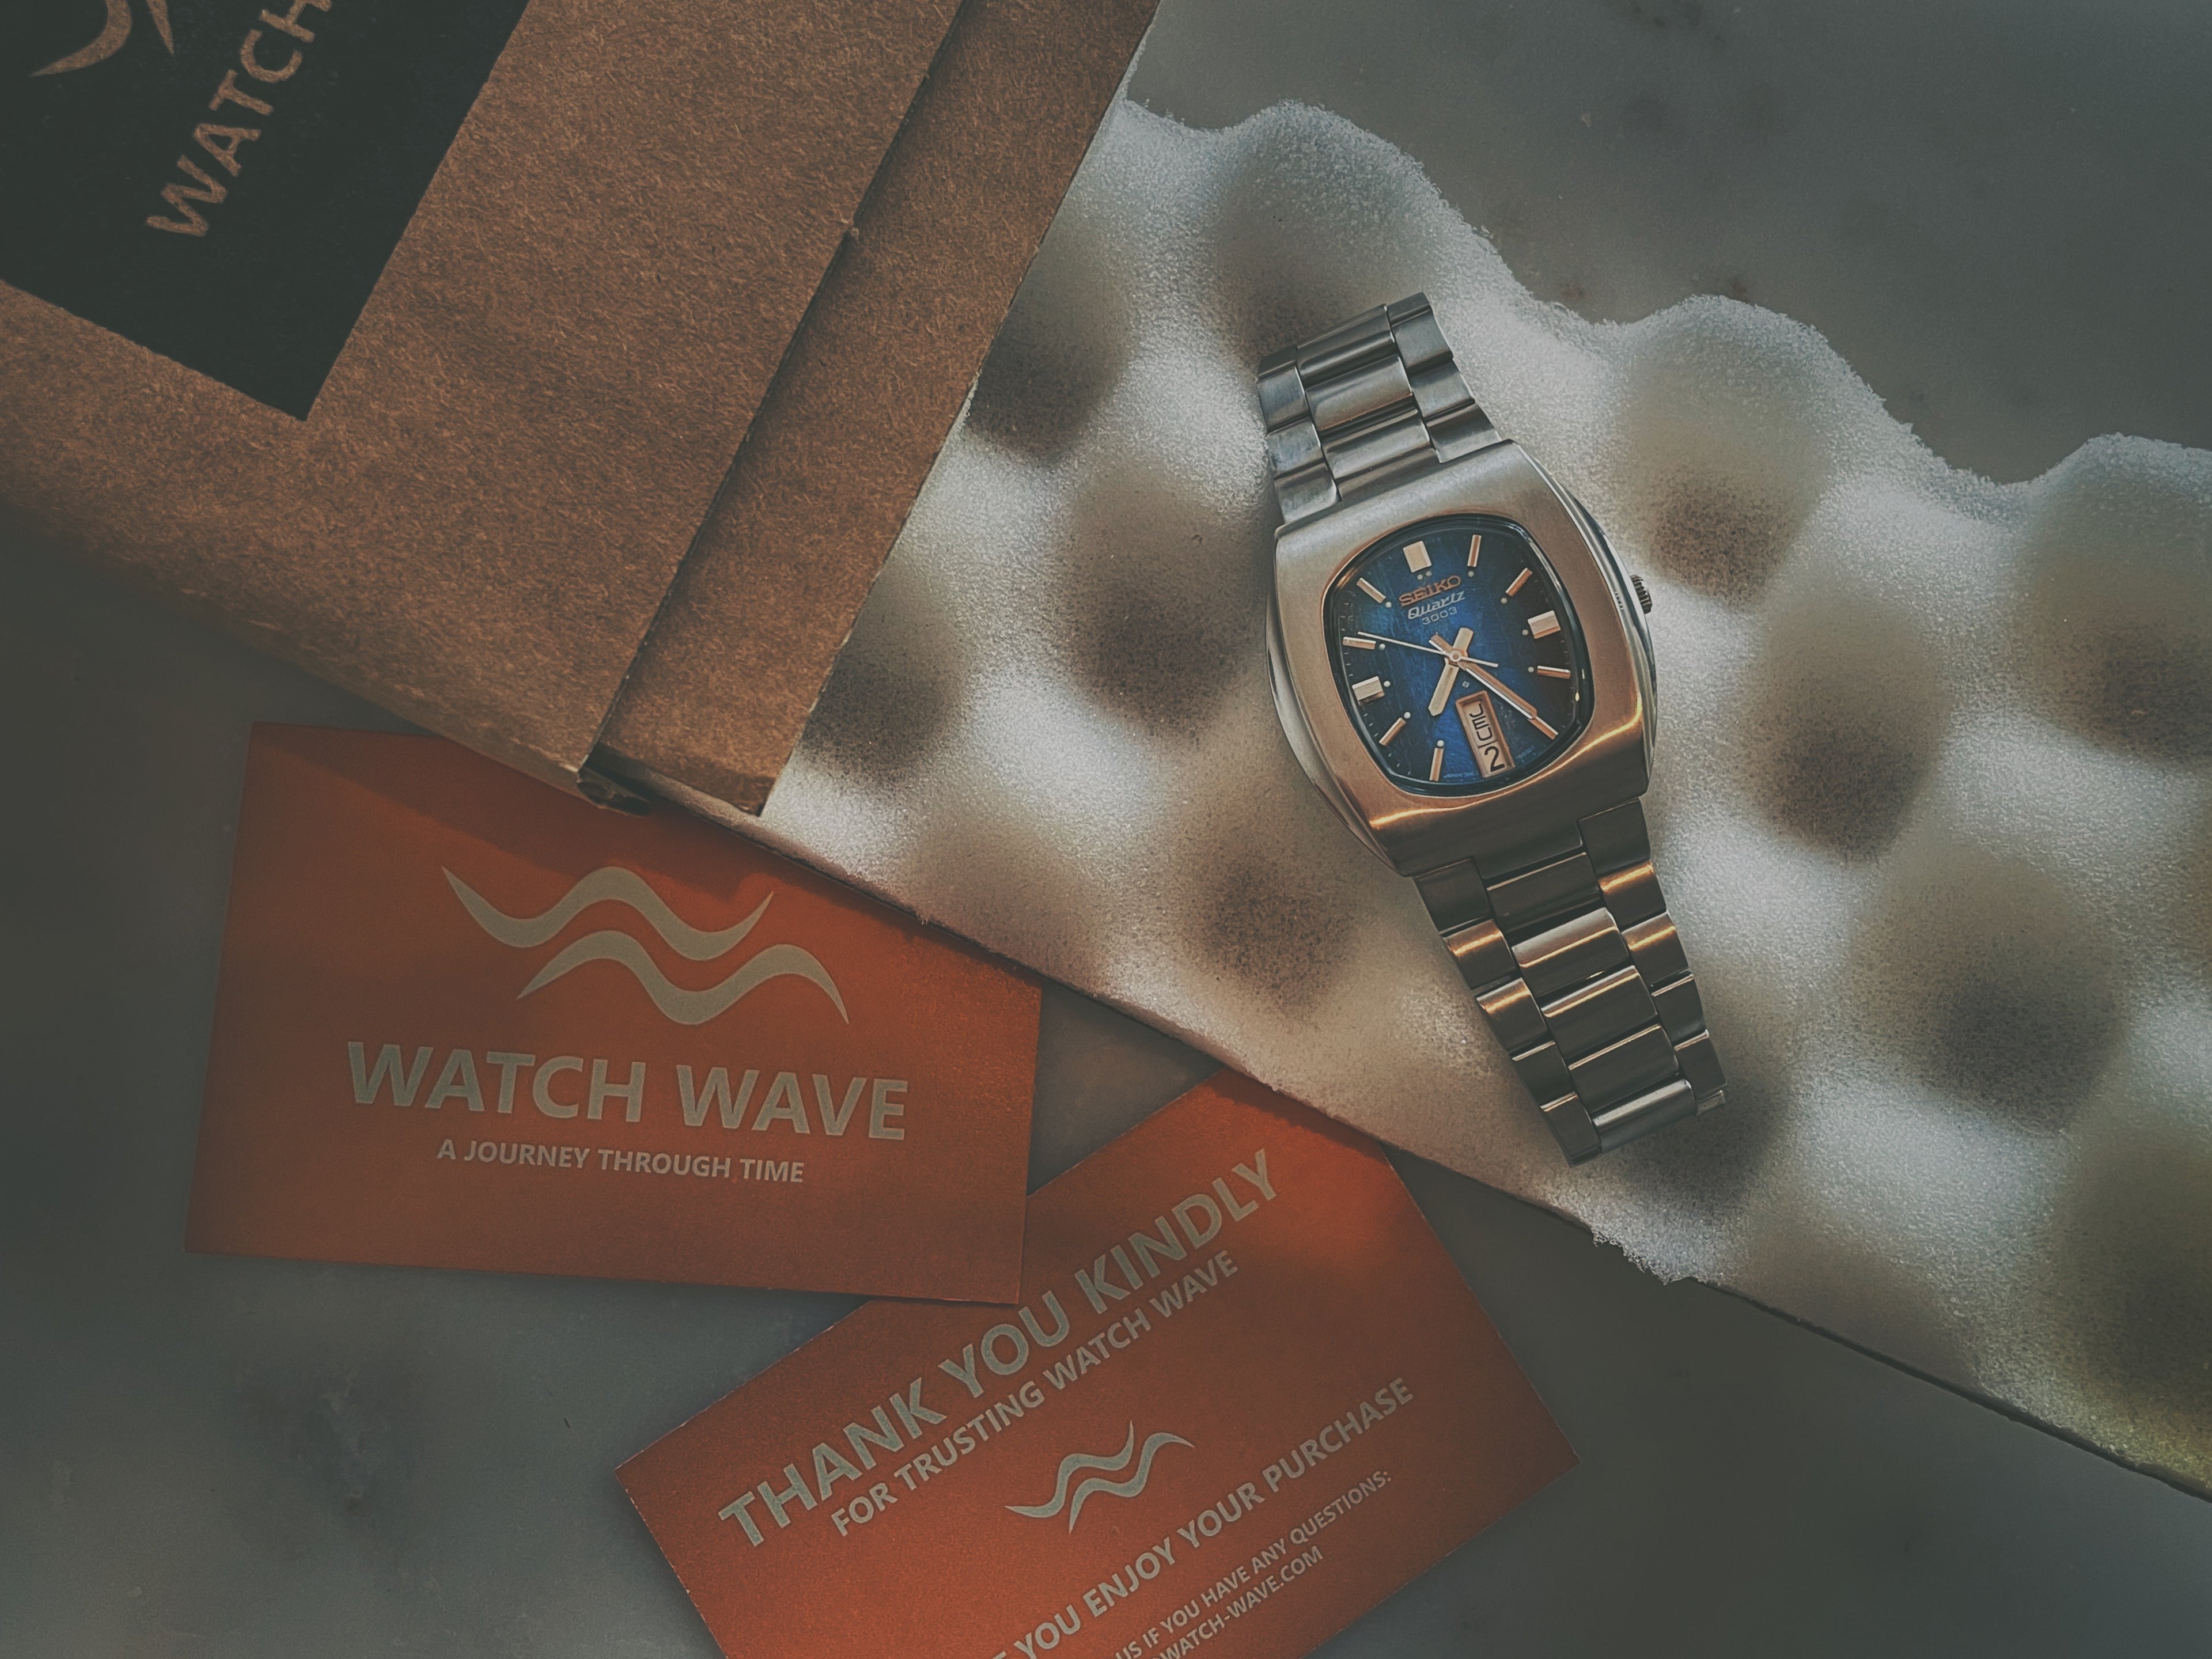 A vintage Seiko laying on a shipping box with a WATCH WAVE business card next to it